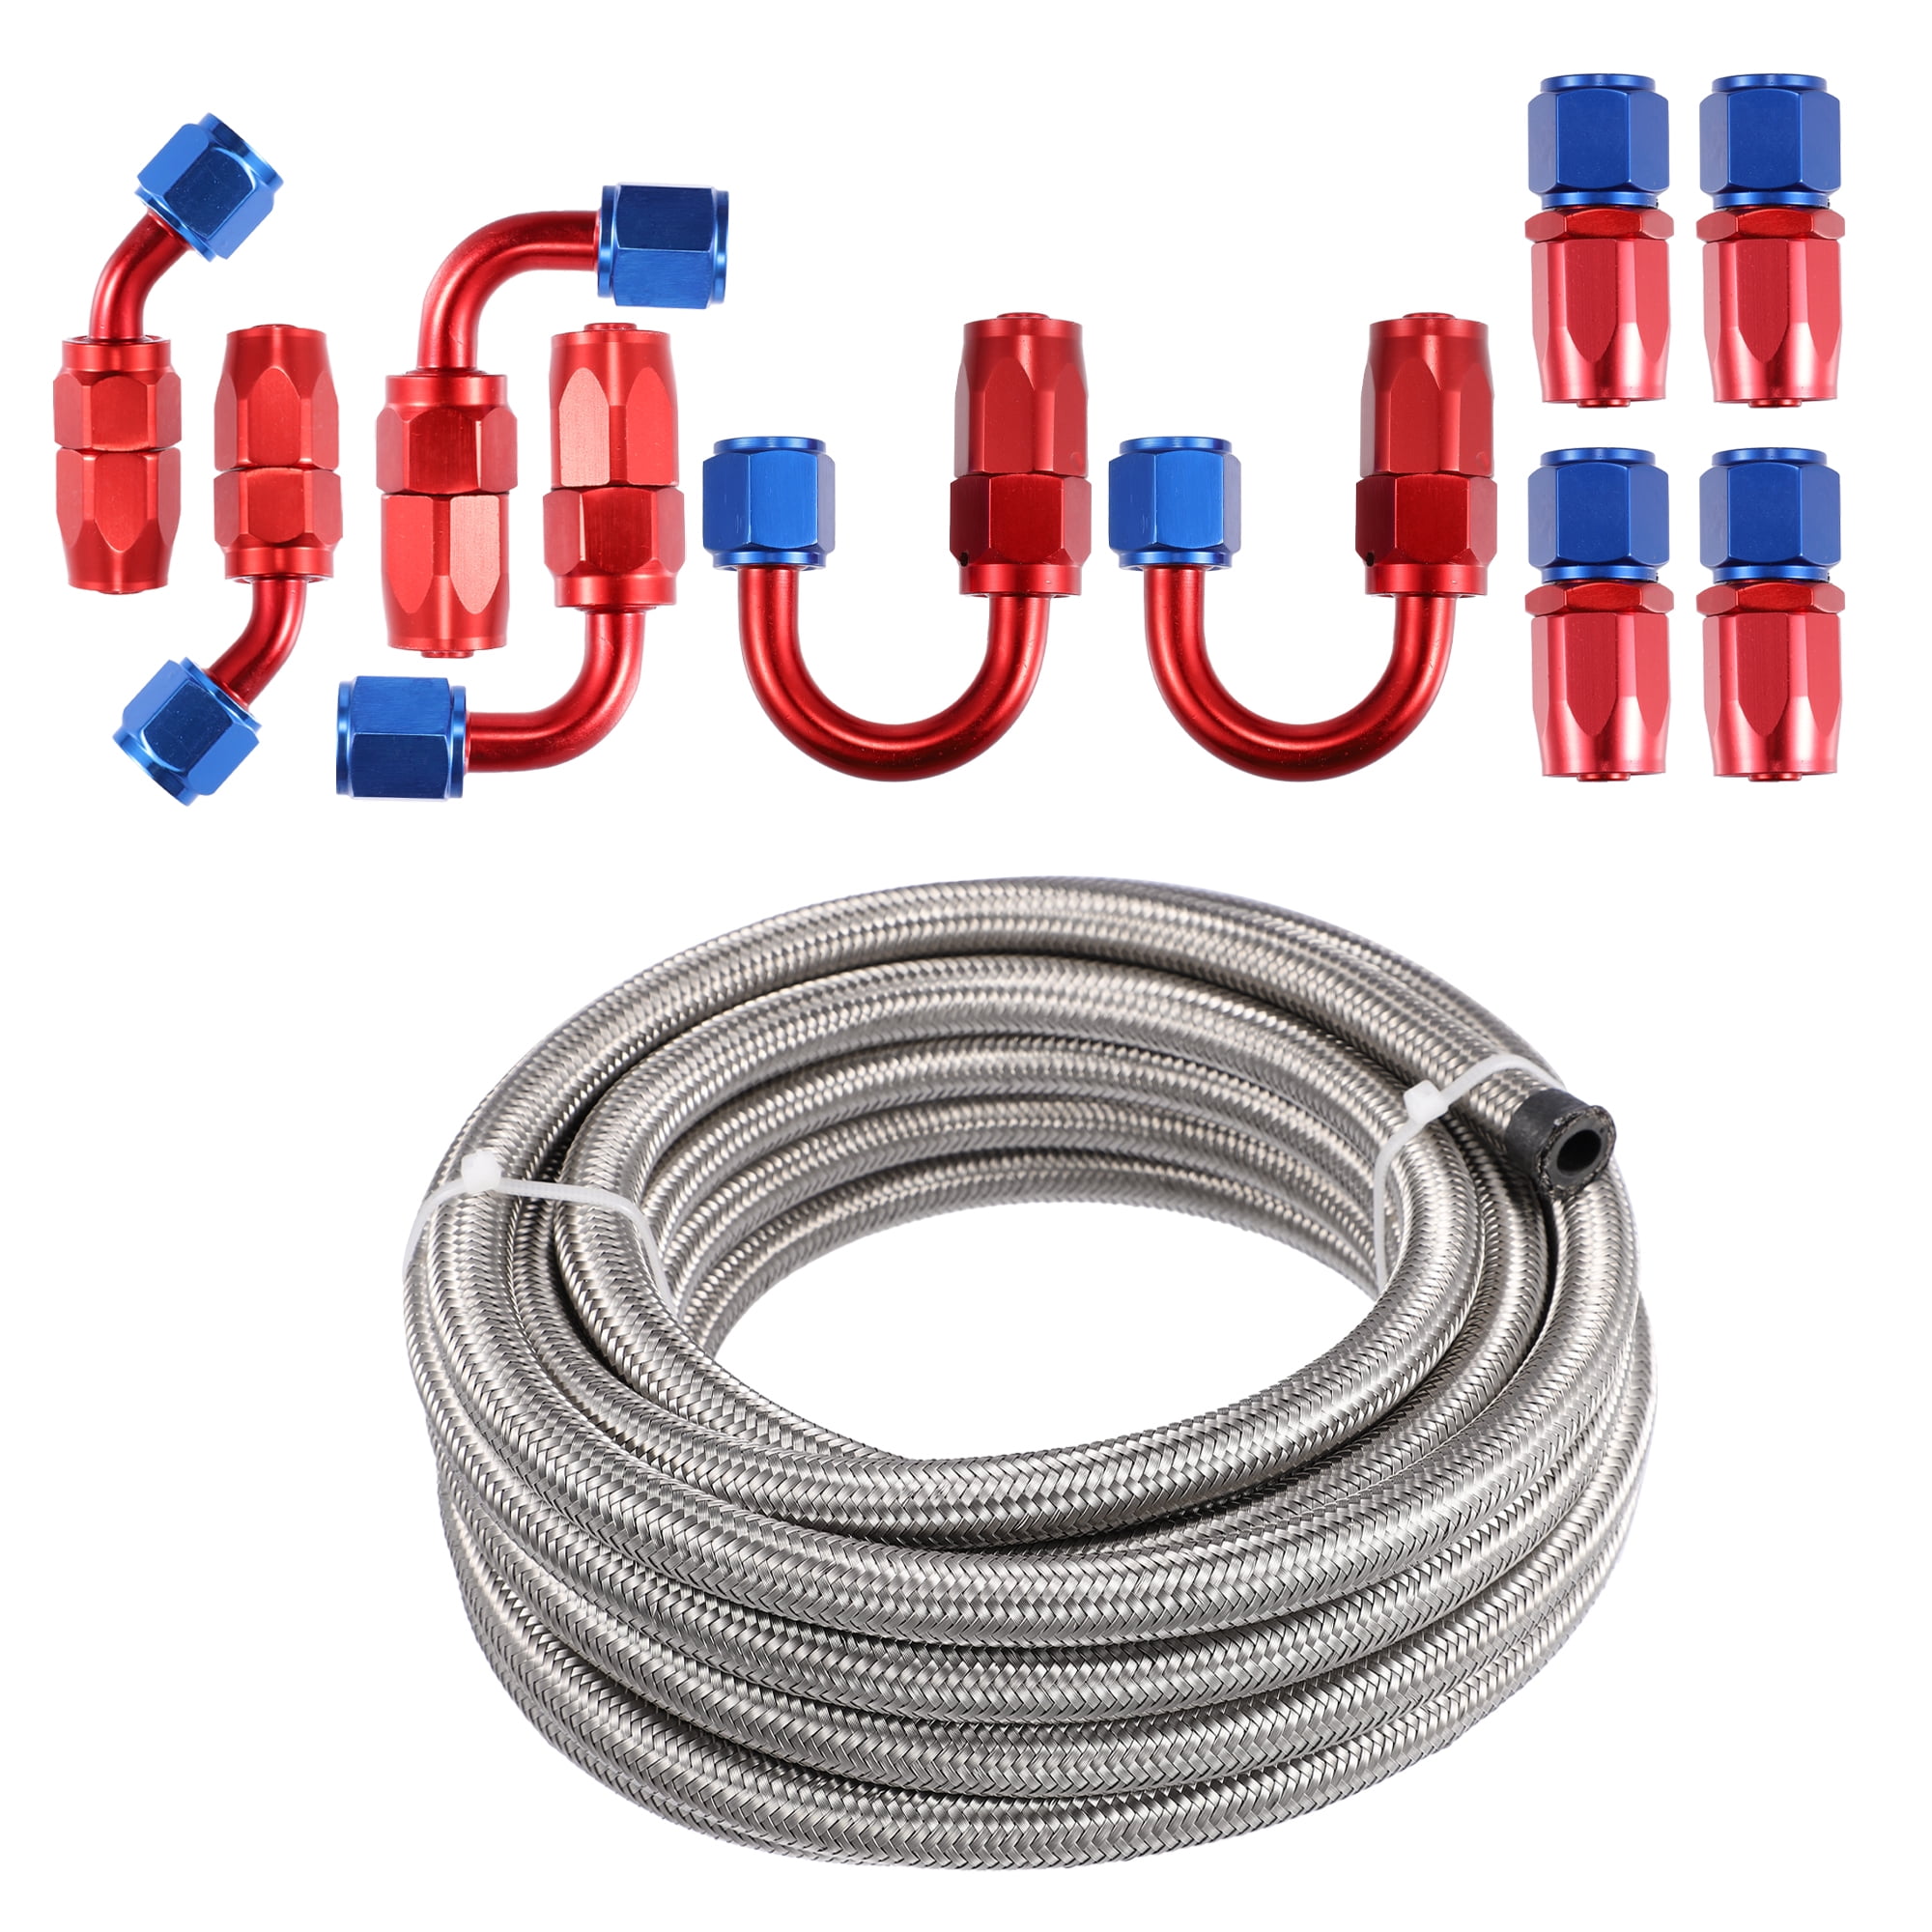 Unique Bargains Car 20ft 6AN 3/8 Universal Braided Oil Fuel Line Hose Kit  CPE Oil Gas Stainless Steel Filler Feed Hose